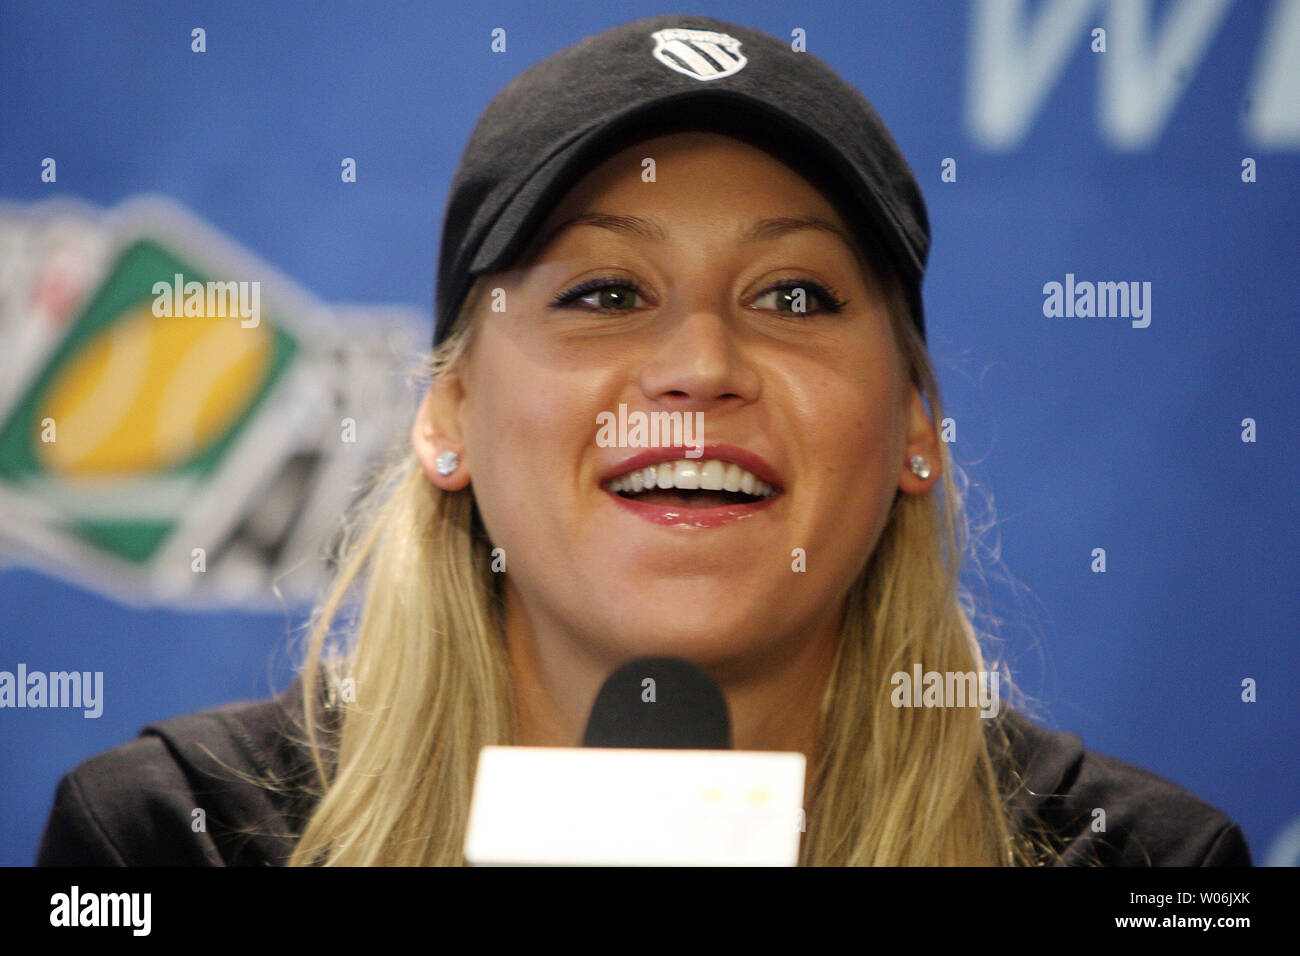 Tennis star Anna Kournikova speaks to reporters during a press conference in St. Louis on July 11, 2009. Kournikova, who has an injured wrist, will not play, as scheduled, at the World Team Tennis with the St. Louis Aces.    (UPI Photo/Bill Greenblatt) Stock Photo